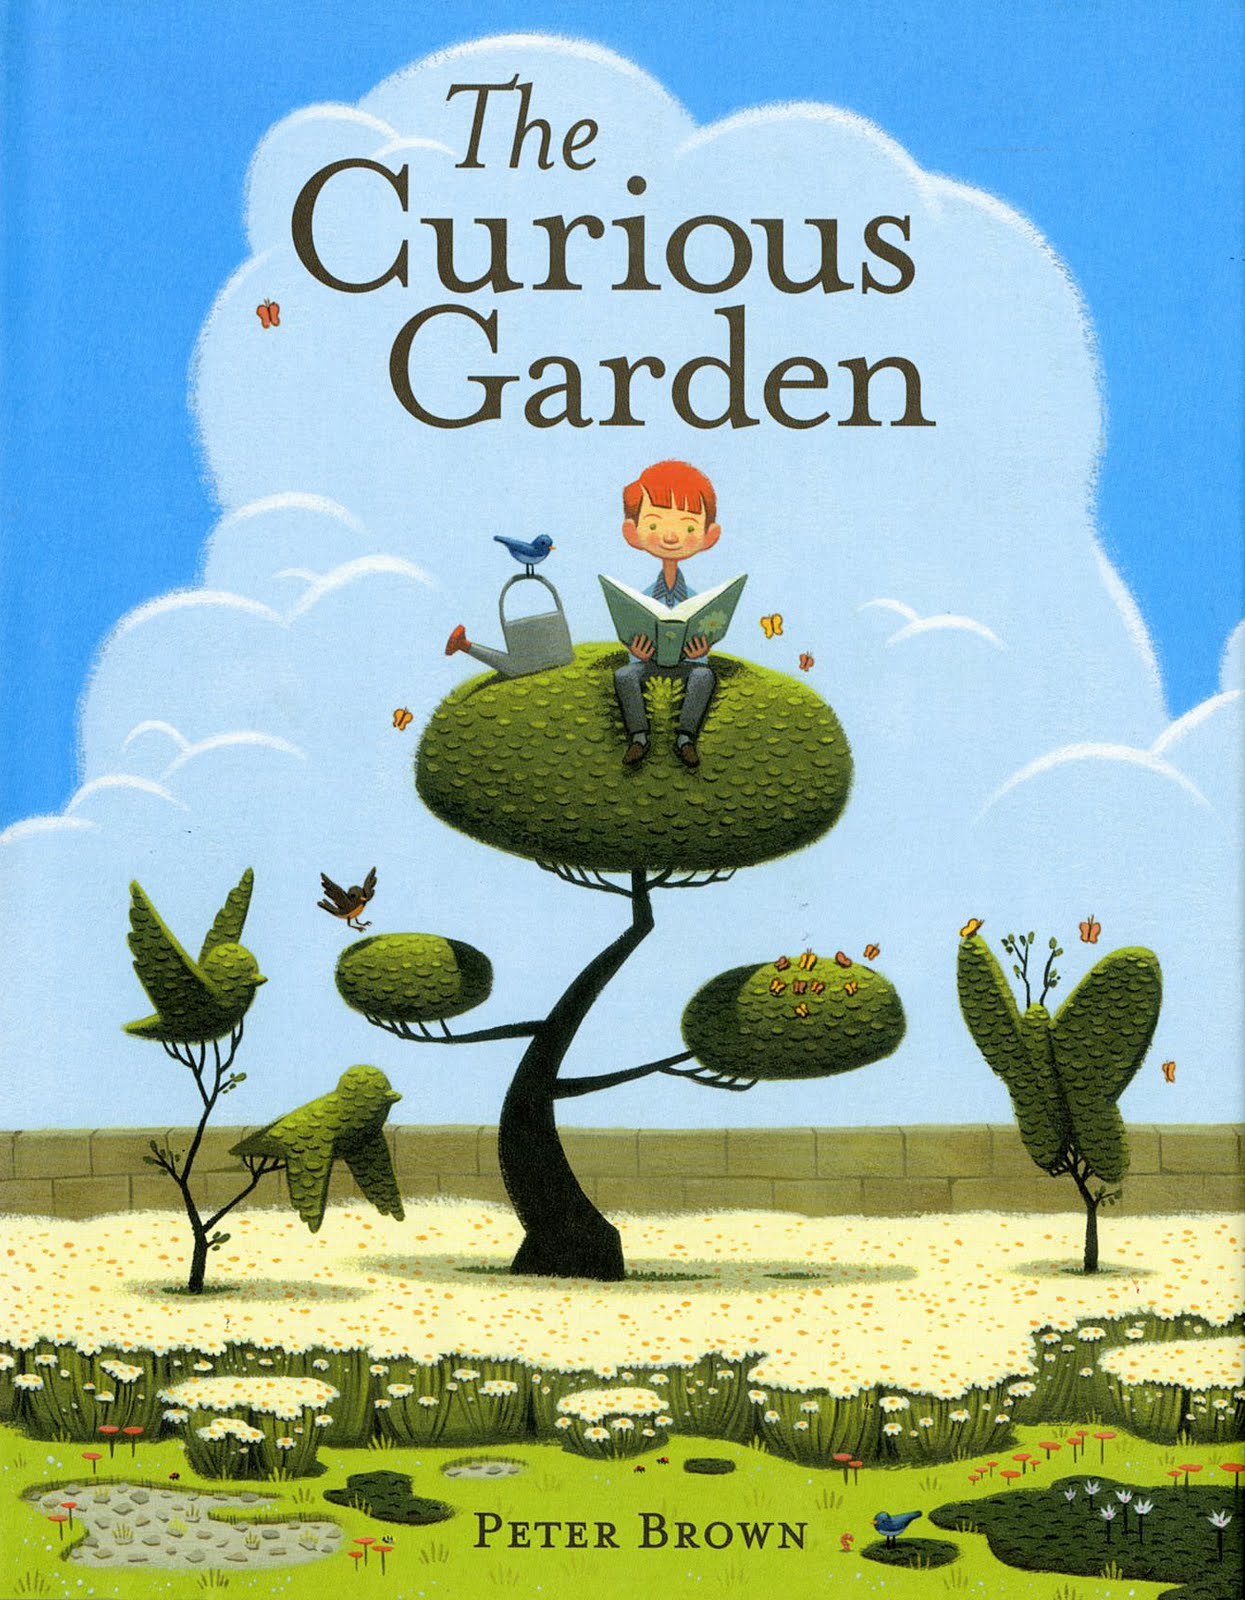 The Curious Garden, by Peter Brown - Cover